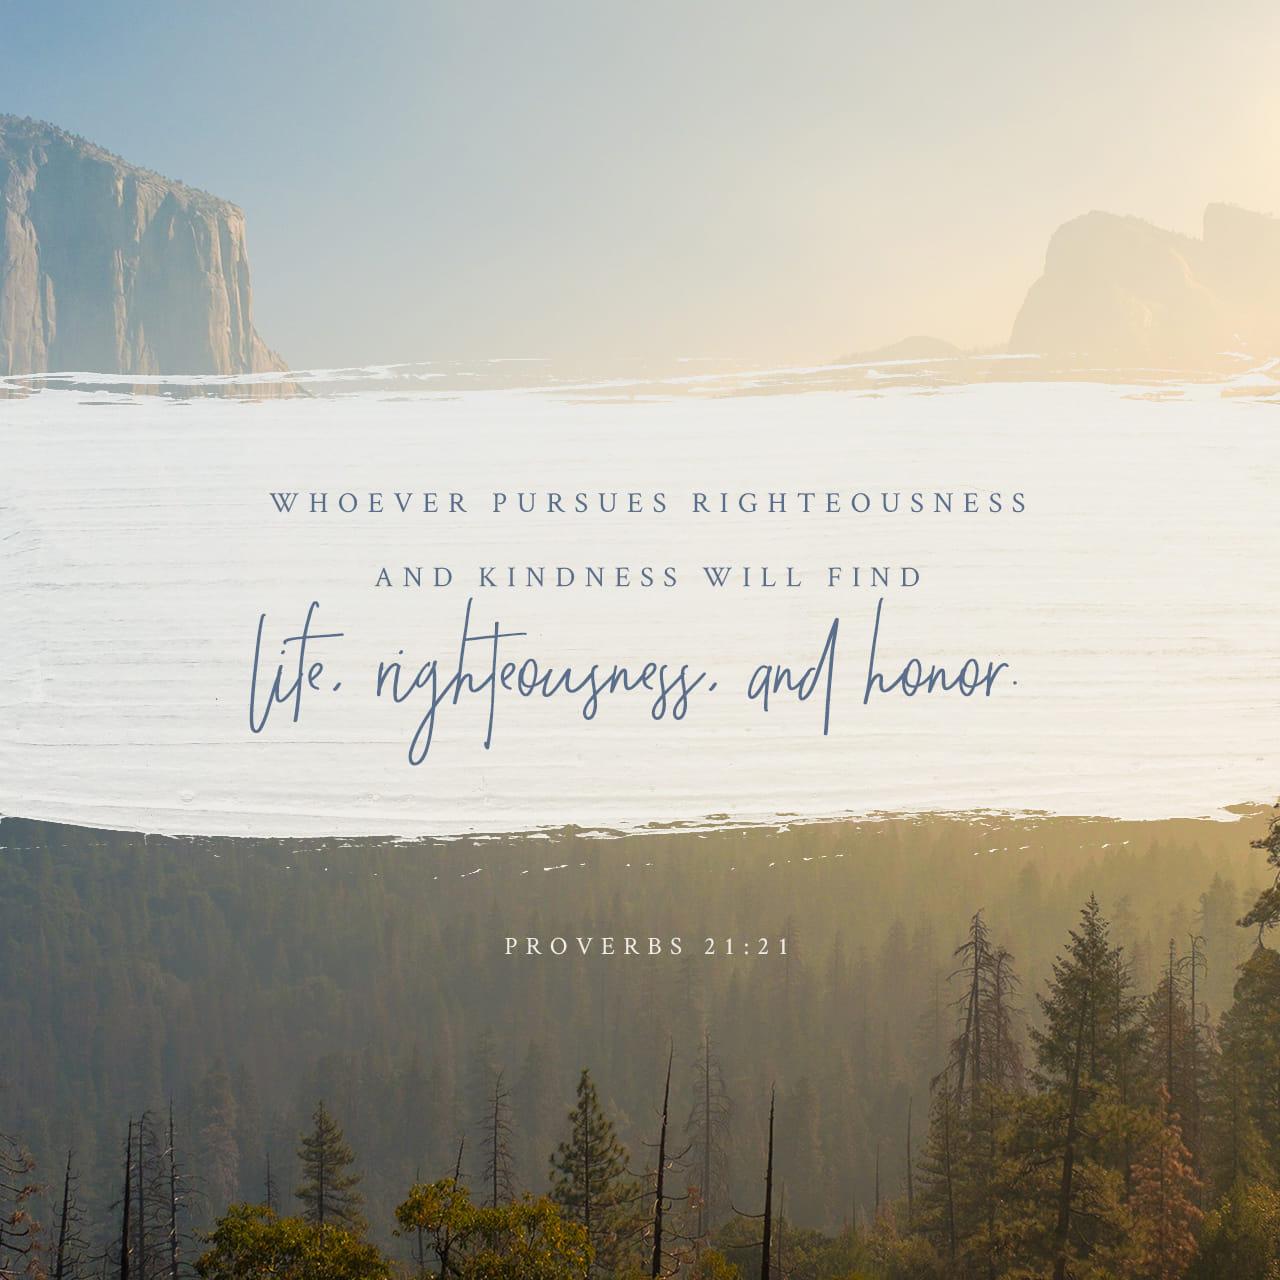 Bible Verse of the Day - day 148 - image 13750 (Proverbs 21:21-22)